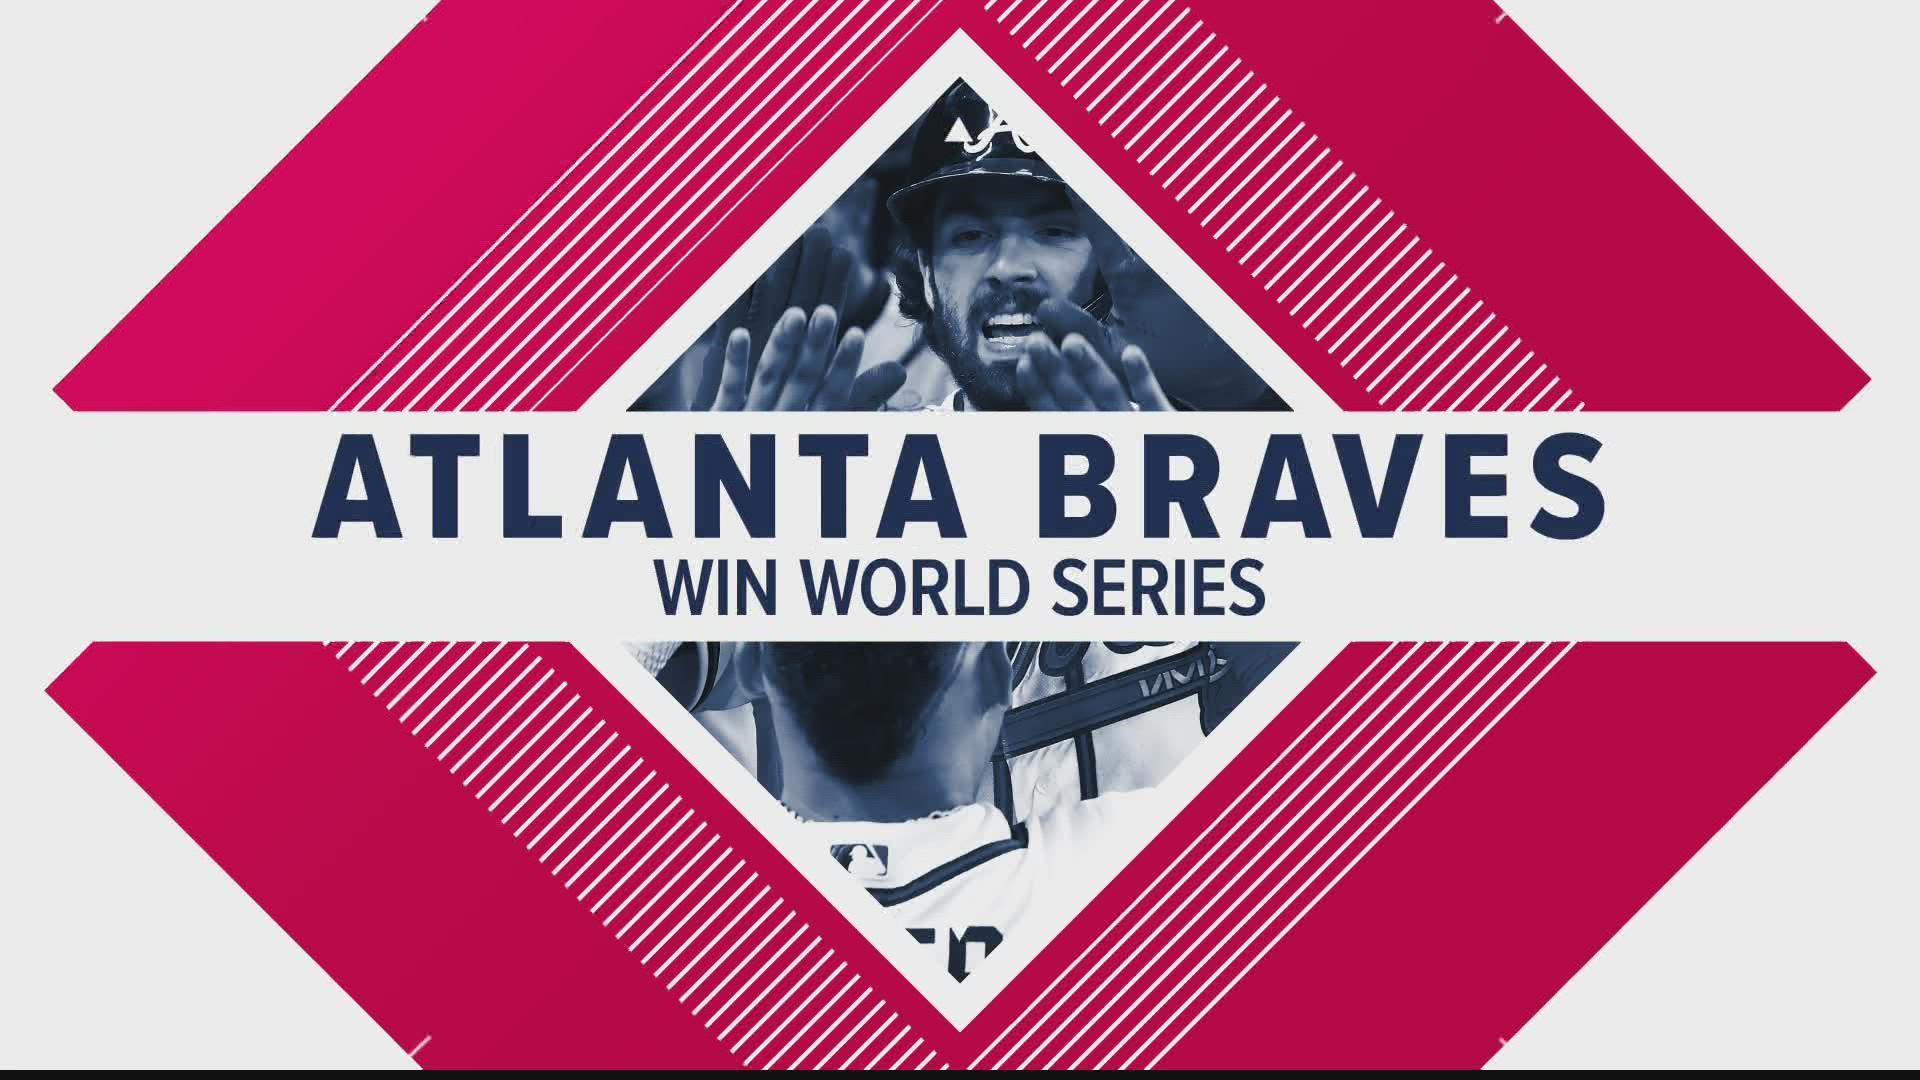 The Atlanta Braves are the 2021 World Series winners. Here is the latest on how Atlanta is celebrating.